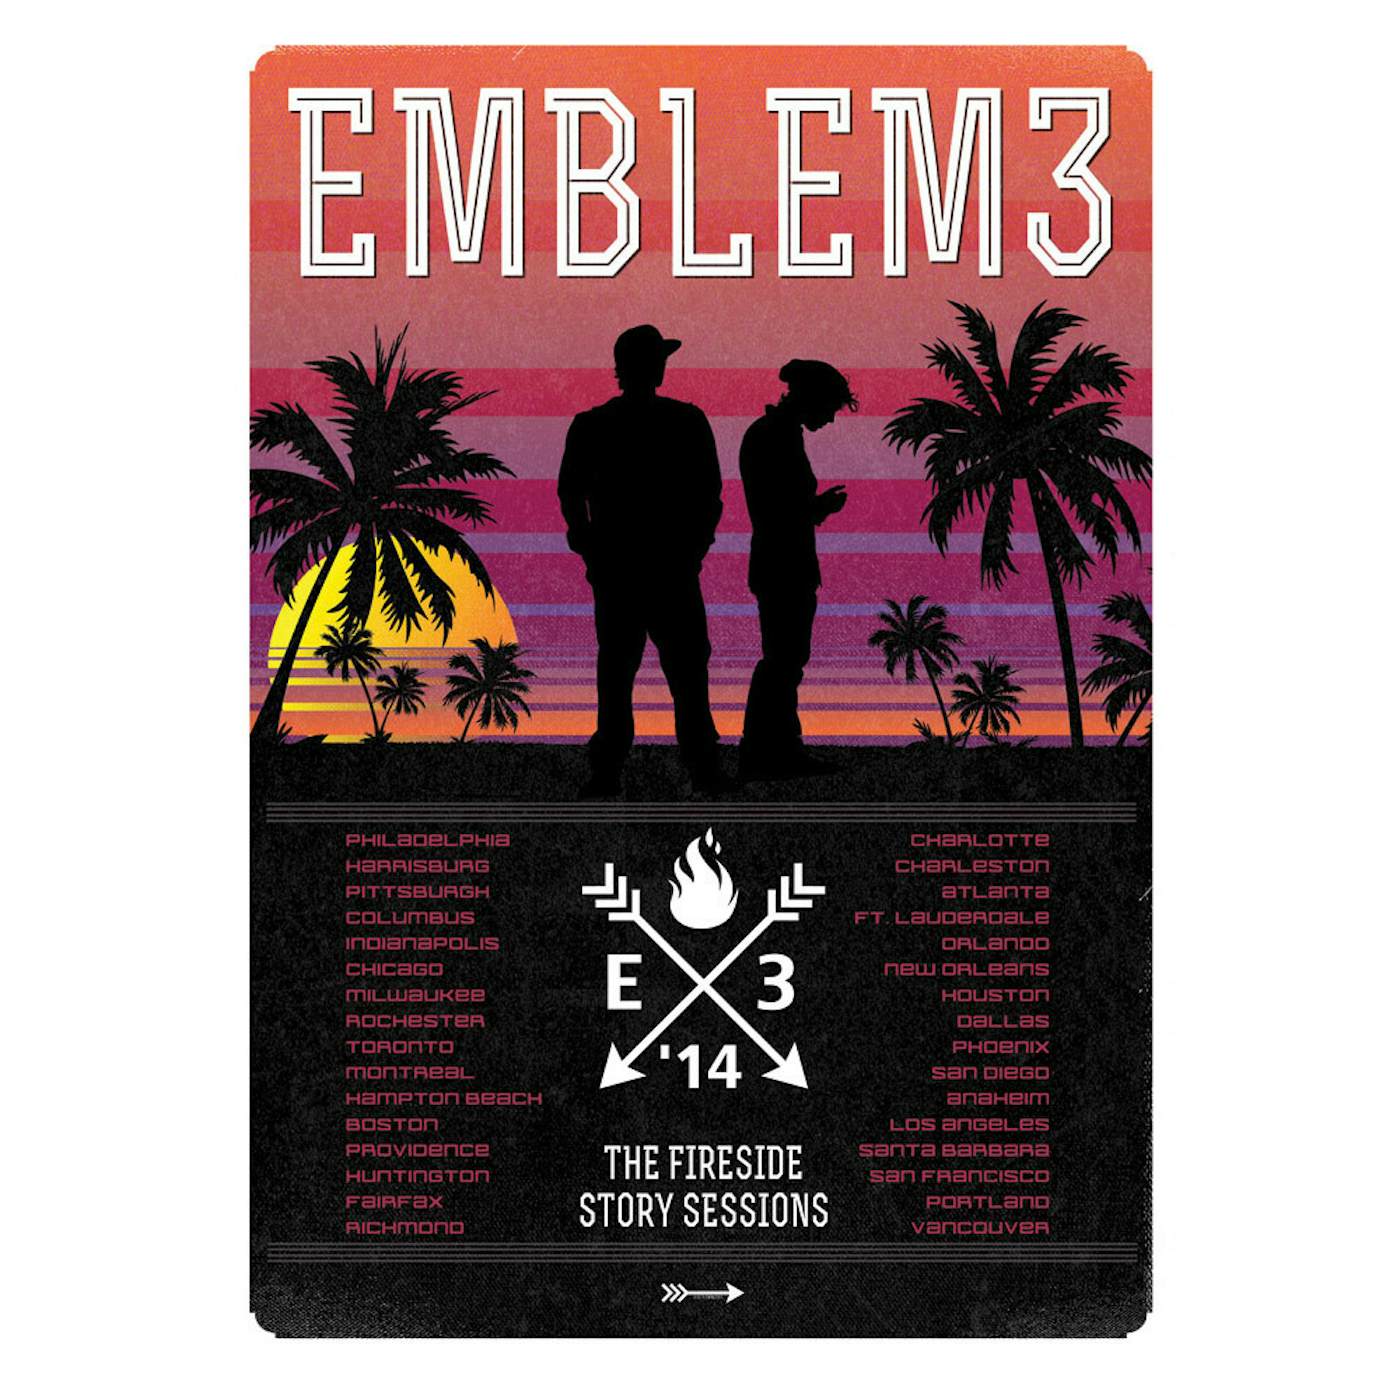 Emblem3 The Fireside Story Sessions Tour Poster